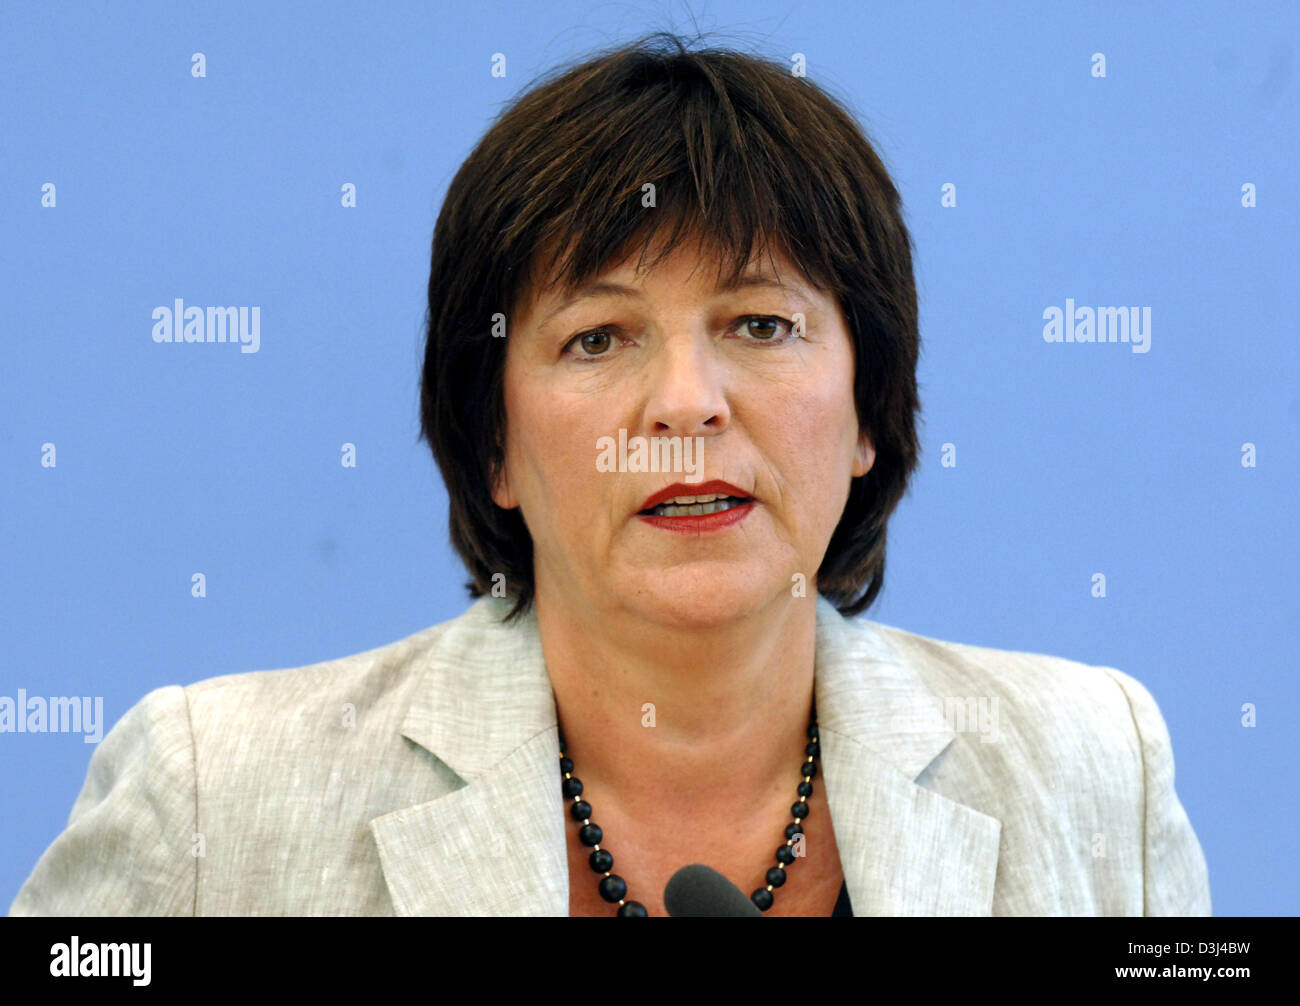 (dpa) - German Minister of Health, Ulla Schmidt (SPD), pictured during the introduction of the pharmaceutical products report 2005 of the health insurance 'Gmuender Erzatzkasse' at a press conference in Berlin, Germany, 14 June 2005. Stock Photo